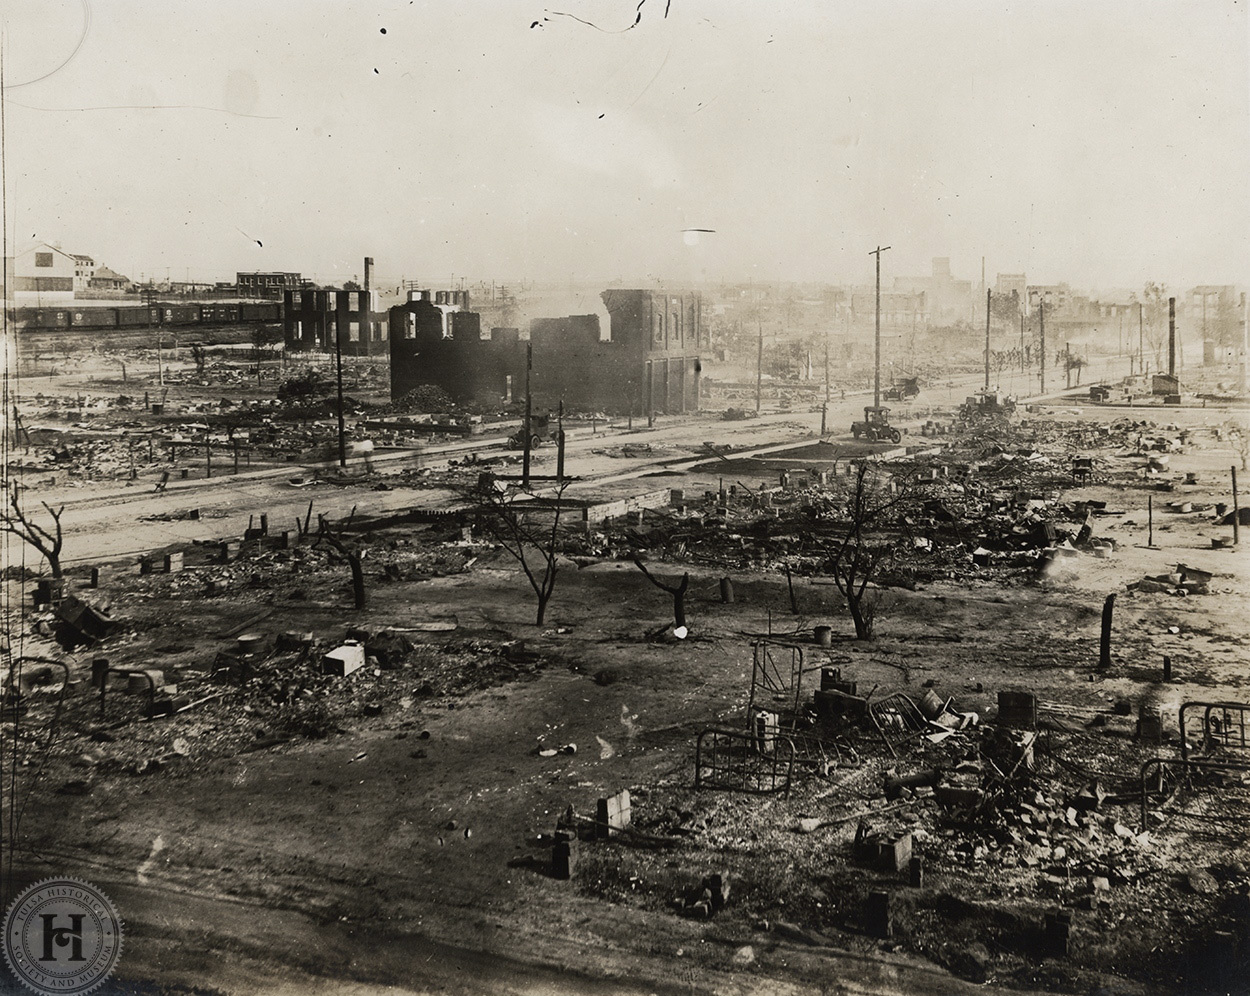 This image depicts the many blocks of devastation in the Greenwood district following the actions of White mob members and the events of the 1921 massacre.